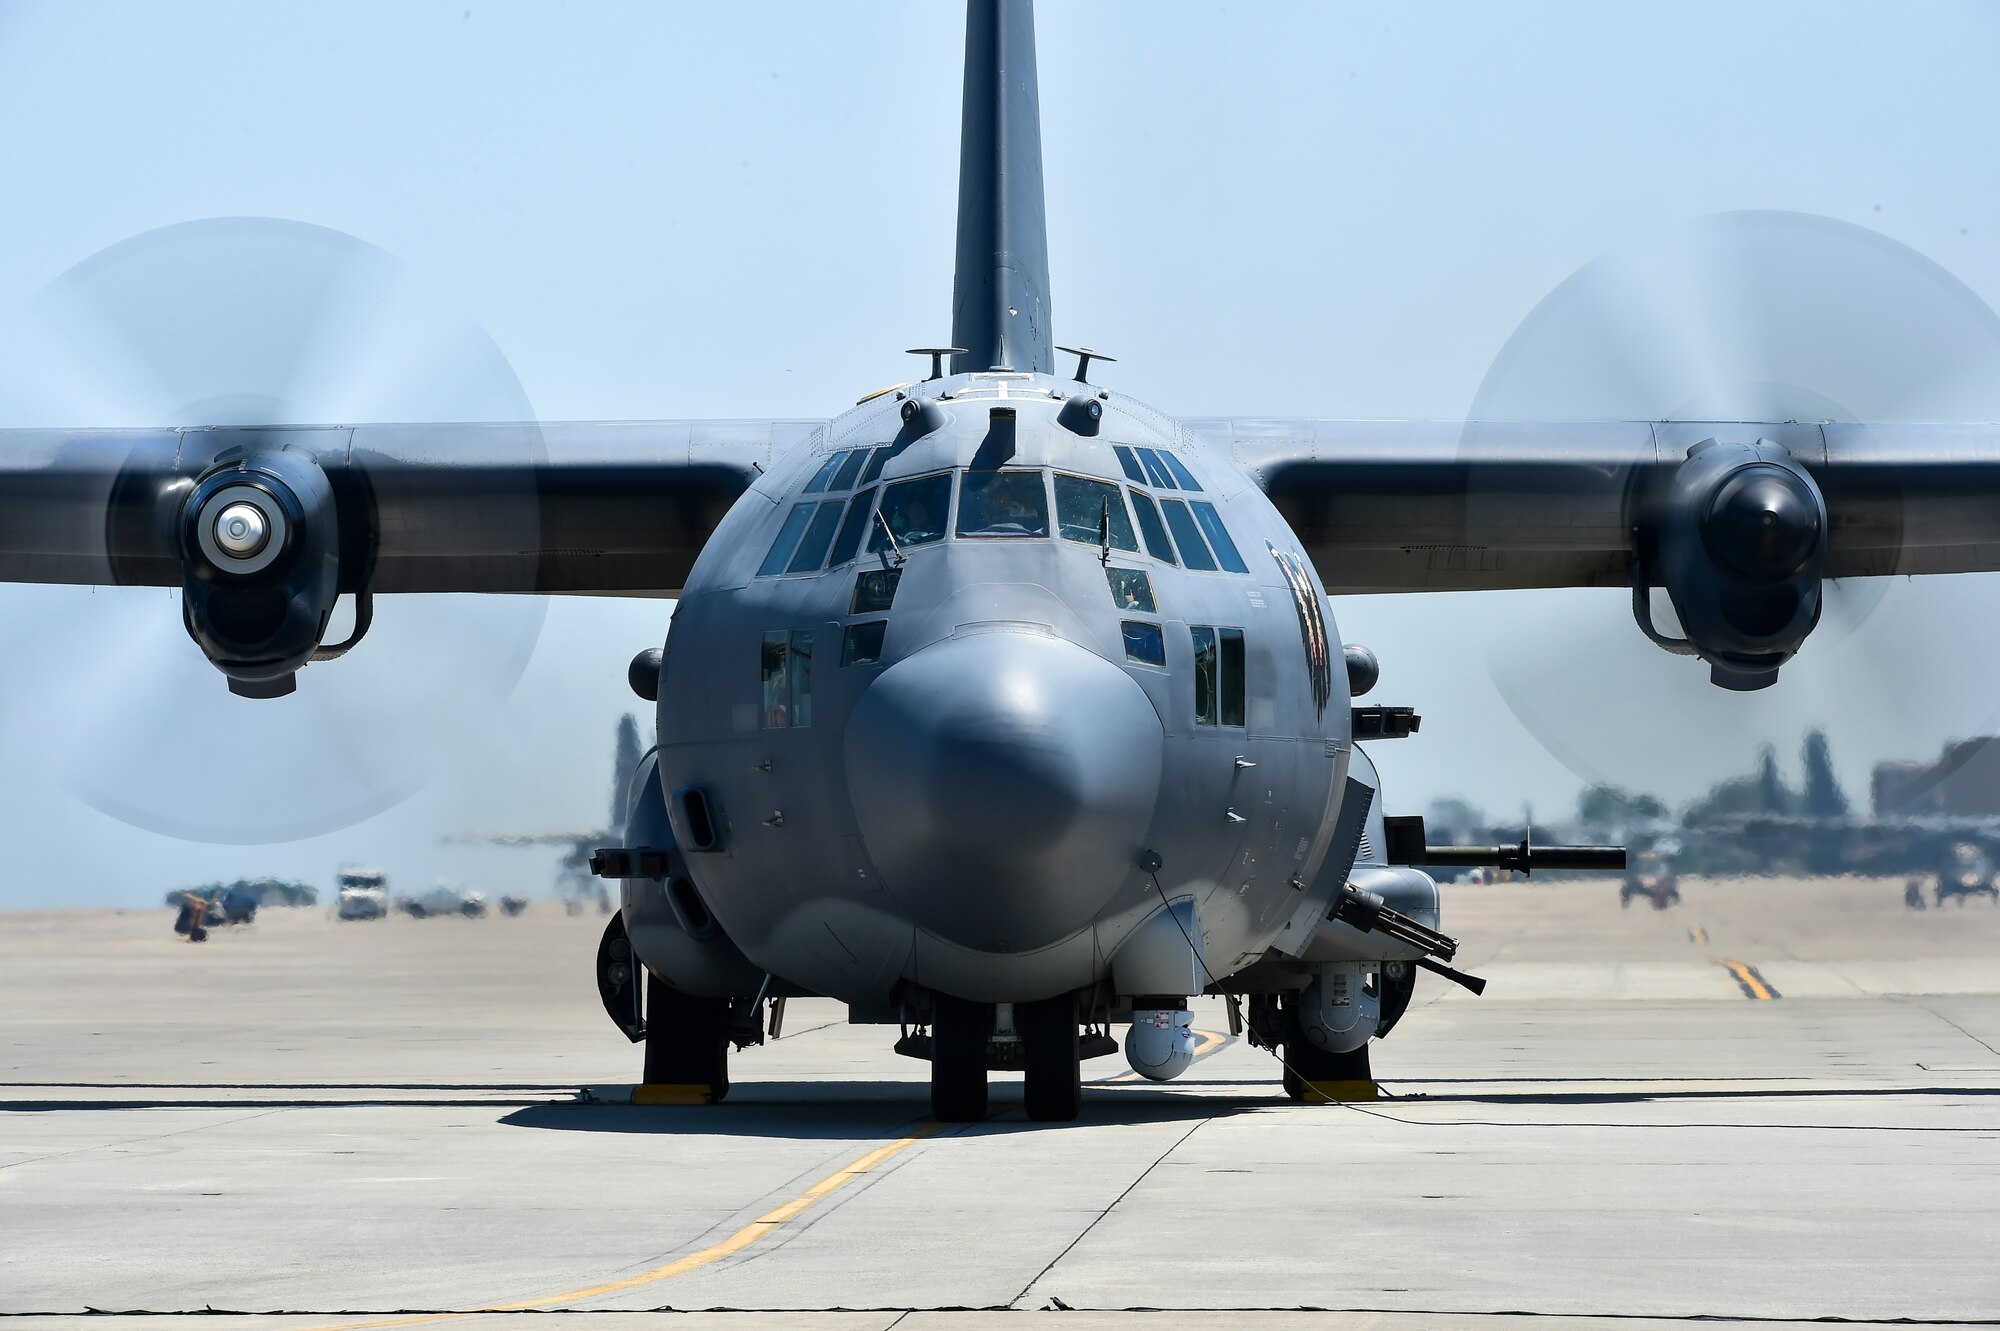 U.S. Air Force crew chiefs with the 1st Special Operations Aircraft Maintenance Squadron perform engine runs on an AC-130U Spooky gunship during Emerald Warrior at Hurlburt Field, Fla., May 6, 2016. Emerald Warrior is a U.S. Special Operations Command-sponsored mission rehearsal exercise during which joint special operations forces train to respond to real and emerging worldwide threats. (U.S. Air Force photo by Senior Airman Jeff Parkinson)